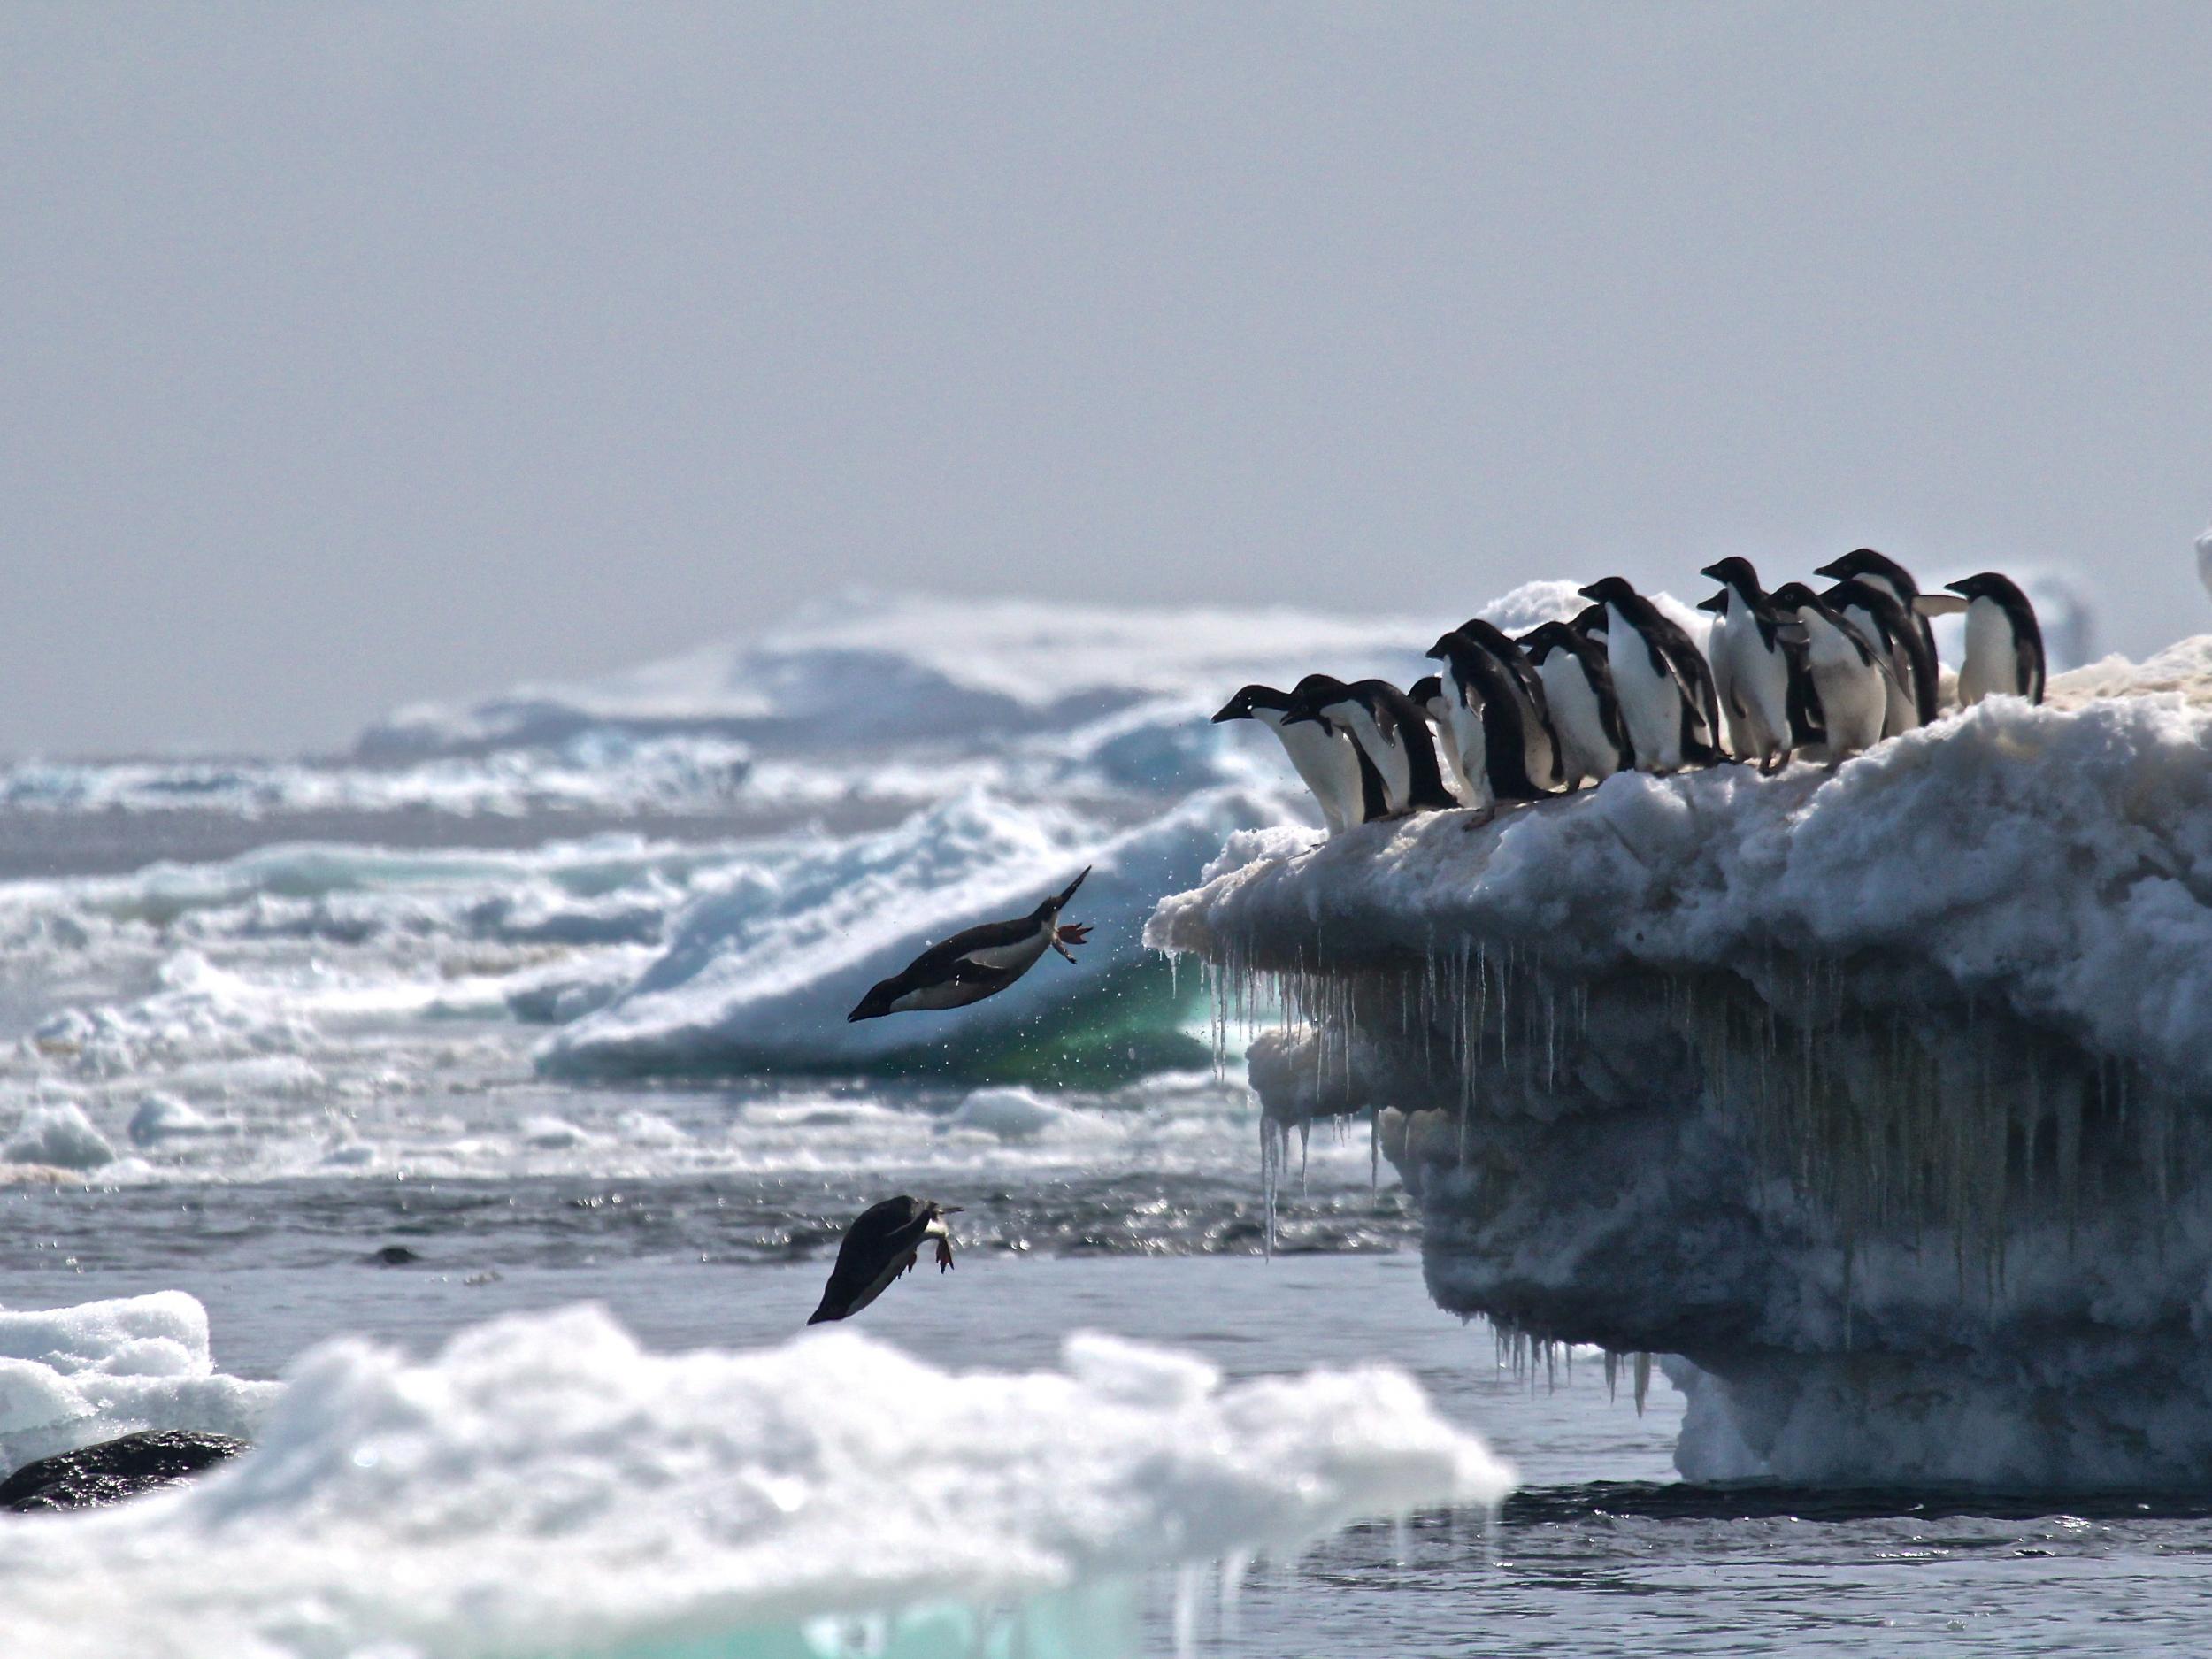 The deal would have protected wildlife such as these Adelie penguins, as well as whales and seals